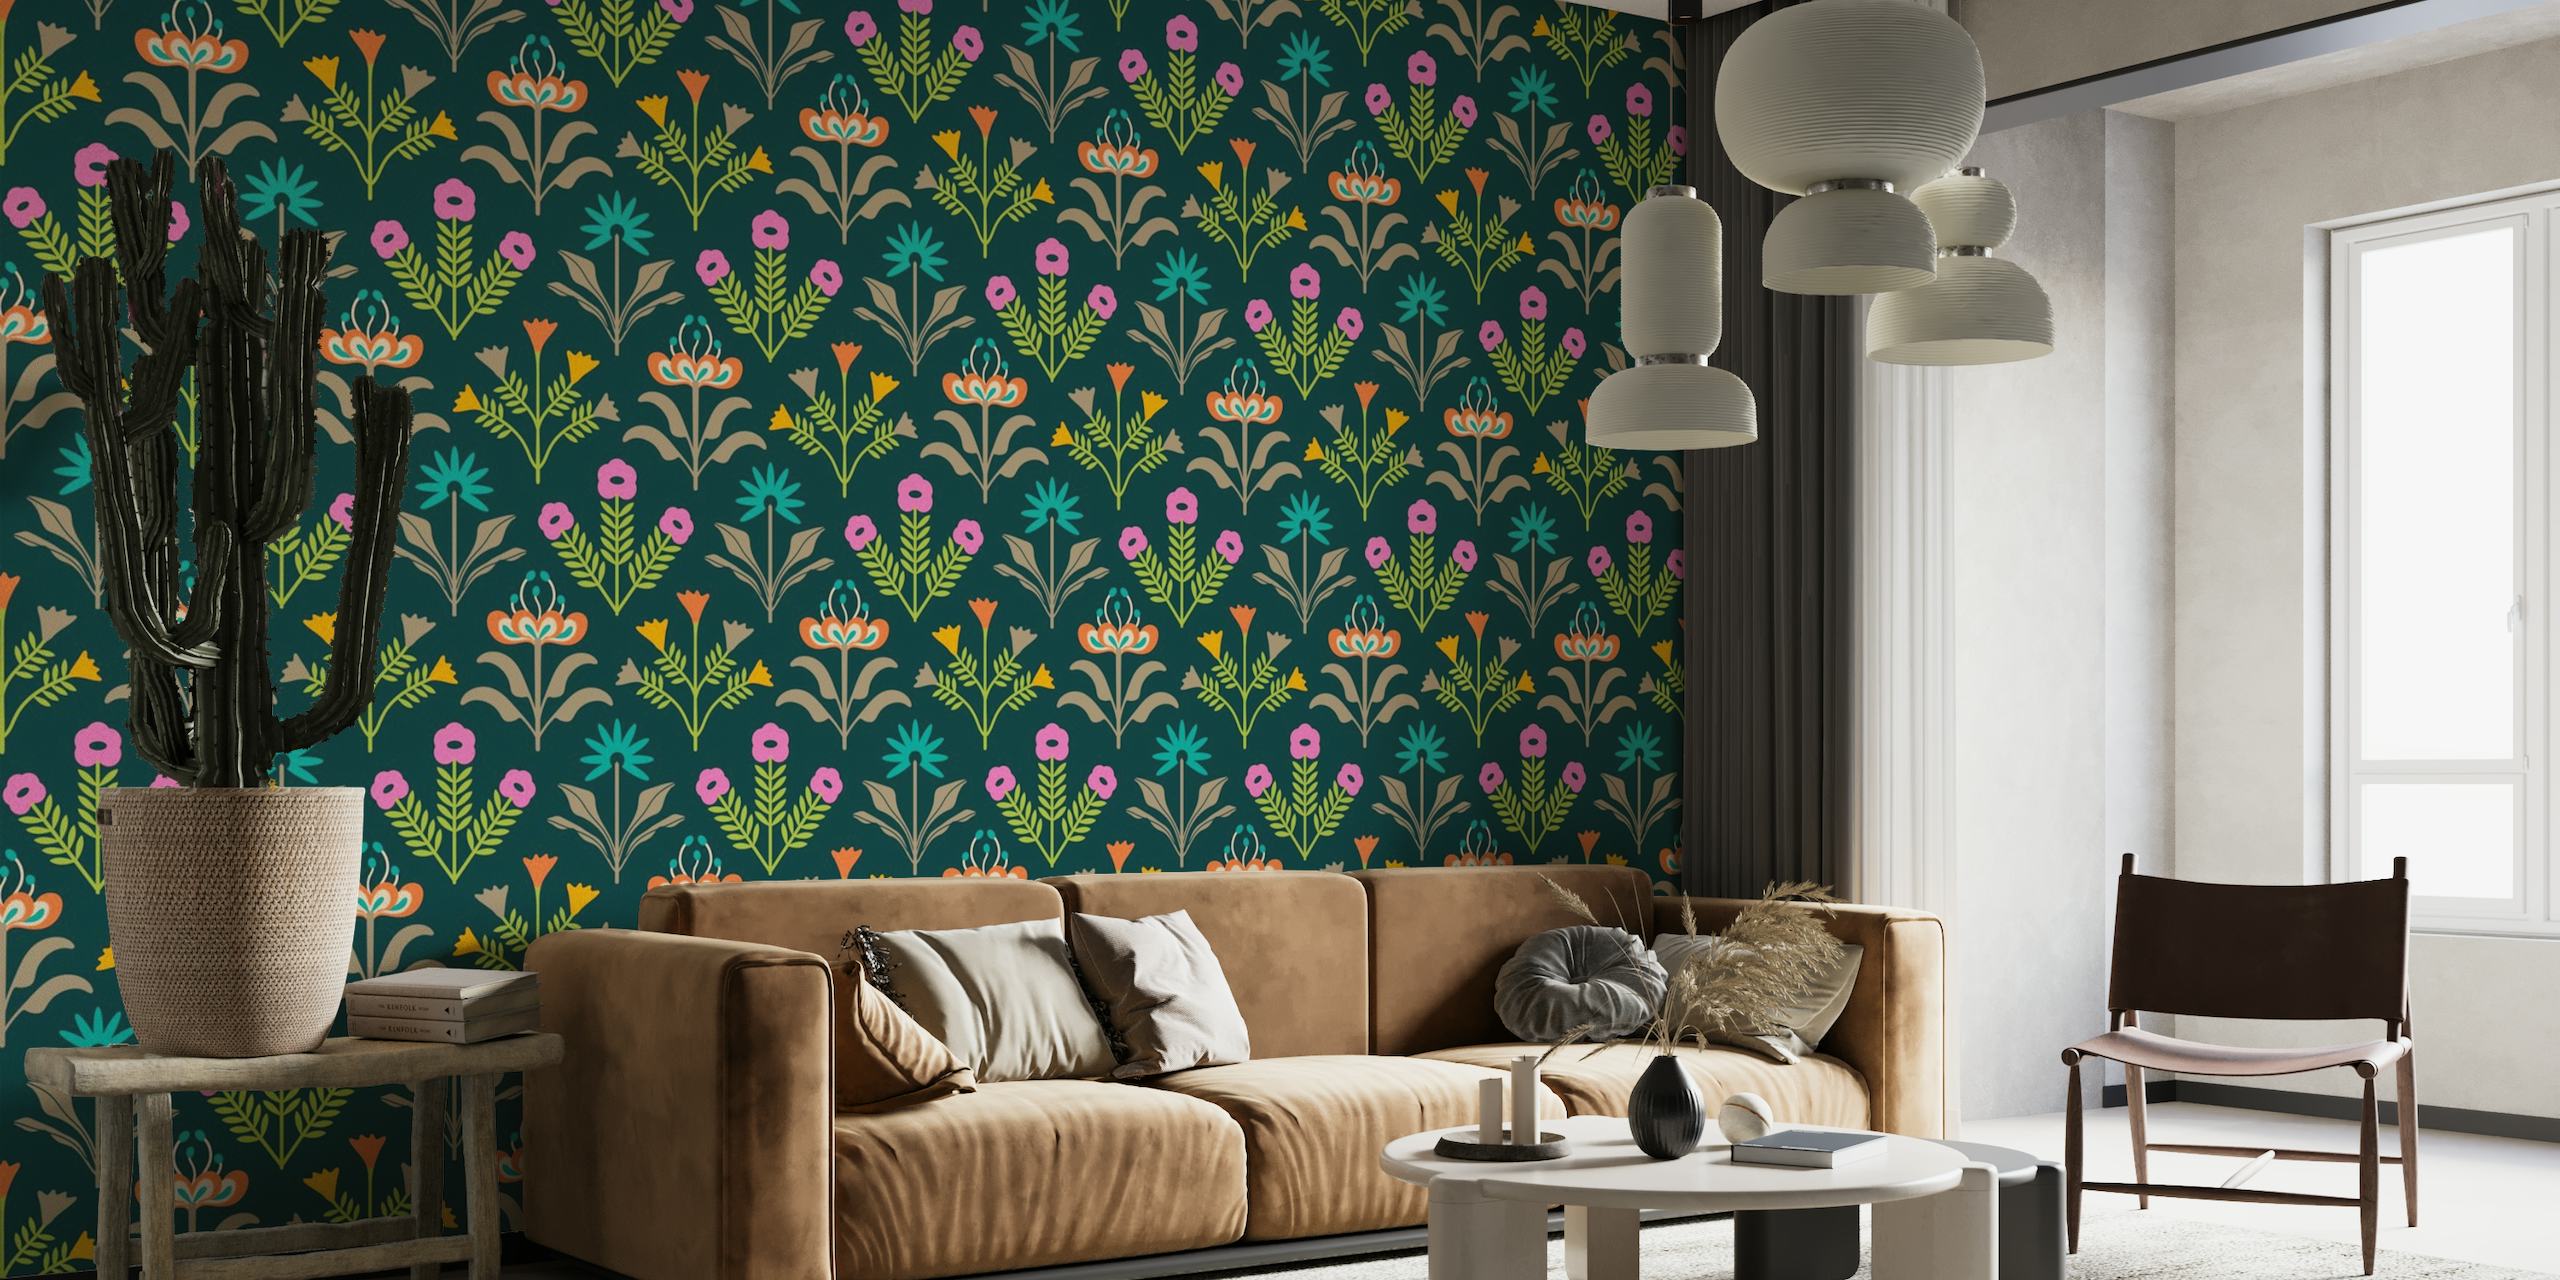 Scandinavian retro floral pattern wall mural with bright colors on a dark background for home decor